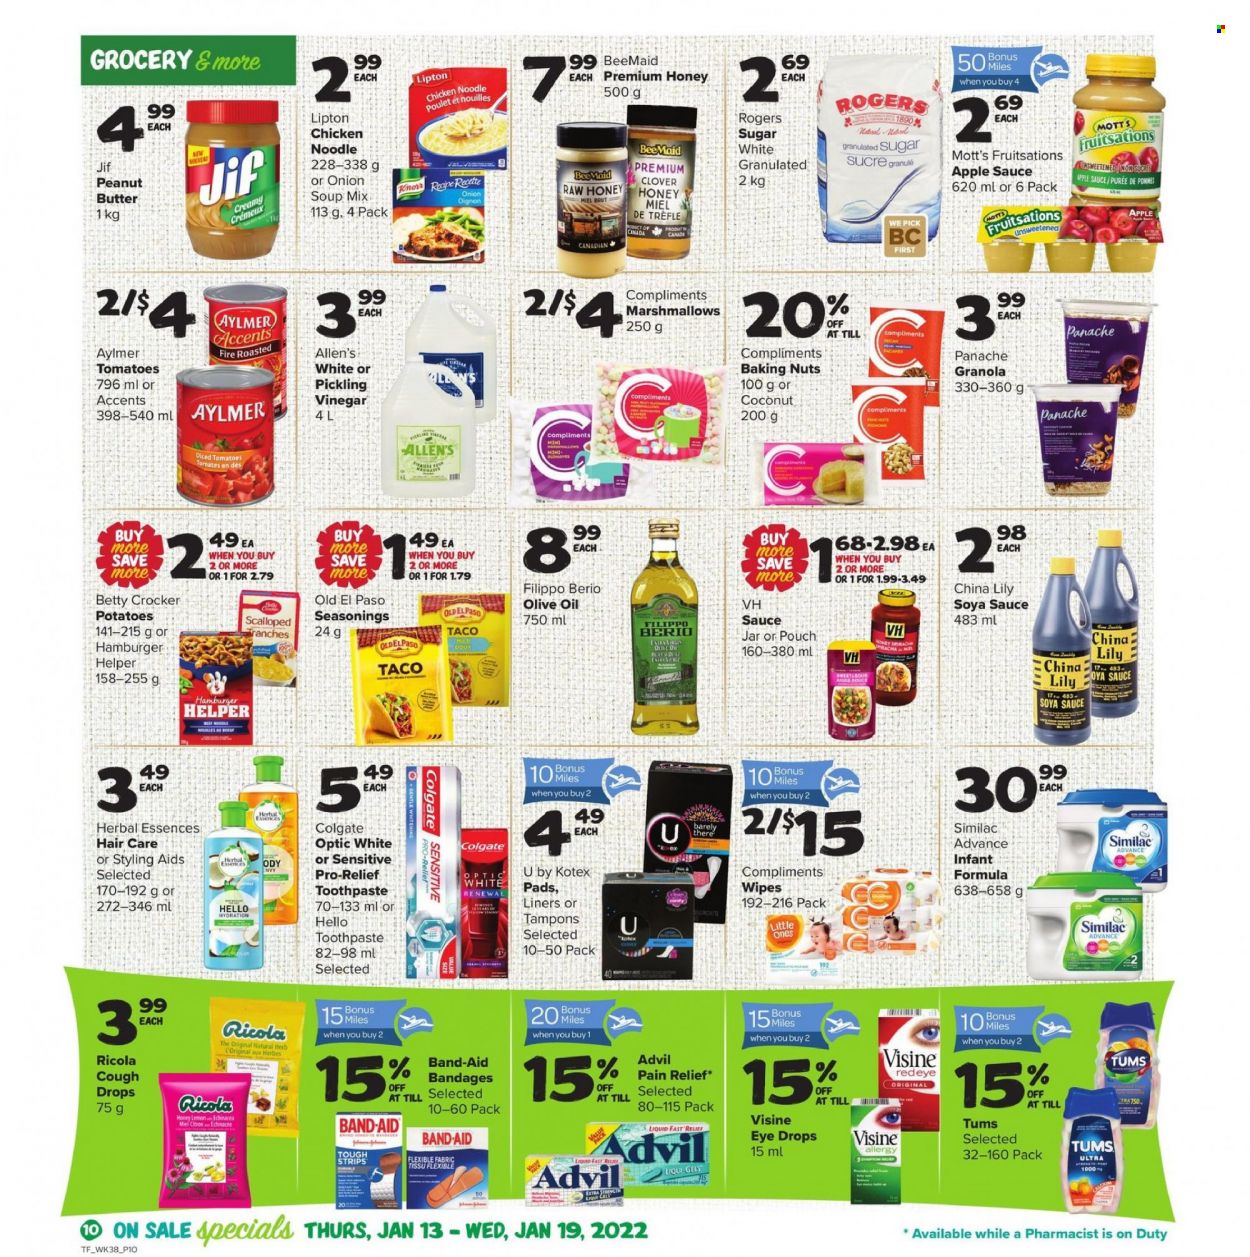 thumbnail - Thrifty Foods Flyer - January 13, 2022 - January 19, 2022 - Sales products - Old El Paso, potatoes, coconut, Mott's, onion soup, soup mix, soup, noodles, strips, marshmallows, Ricola, granulated sugar, sugar, soy sauce, vinegar, olive oil, oil, apple sauce, peanut butter, Jif, Similac, wipes, toothpaste, Kotex, Kotex pads, tampons, Herbal Essences, Brut, pain relief, eye drops, Advil Rapid, cough drops, Knorr, band-aid, Colgate, granola, Lipton. Page 10.